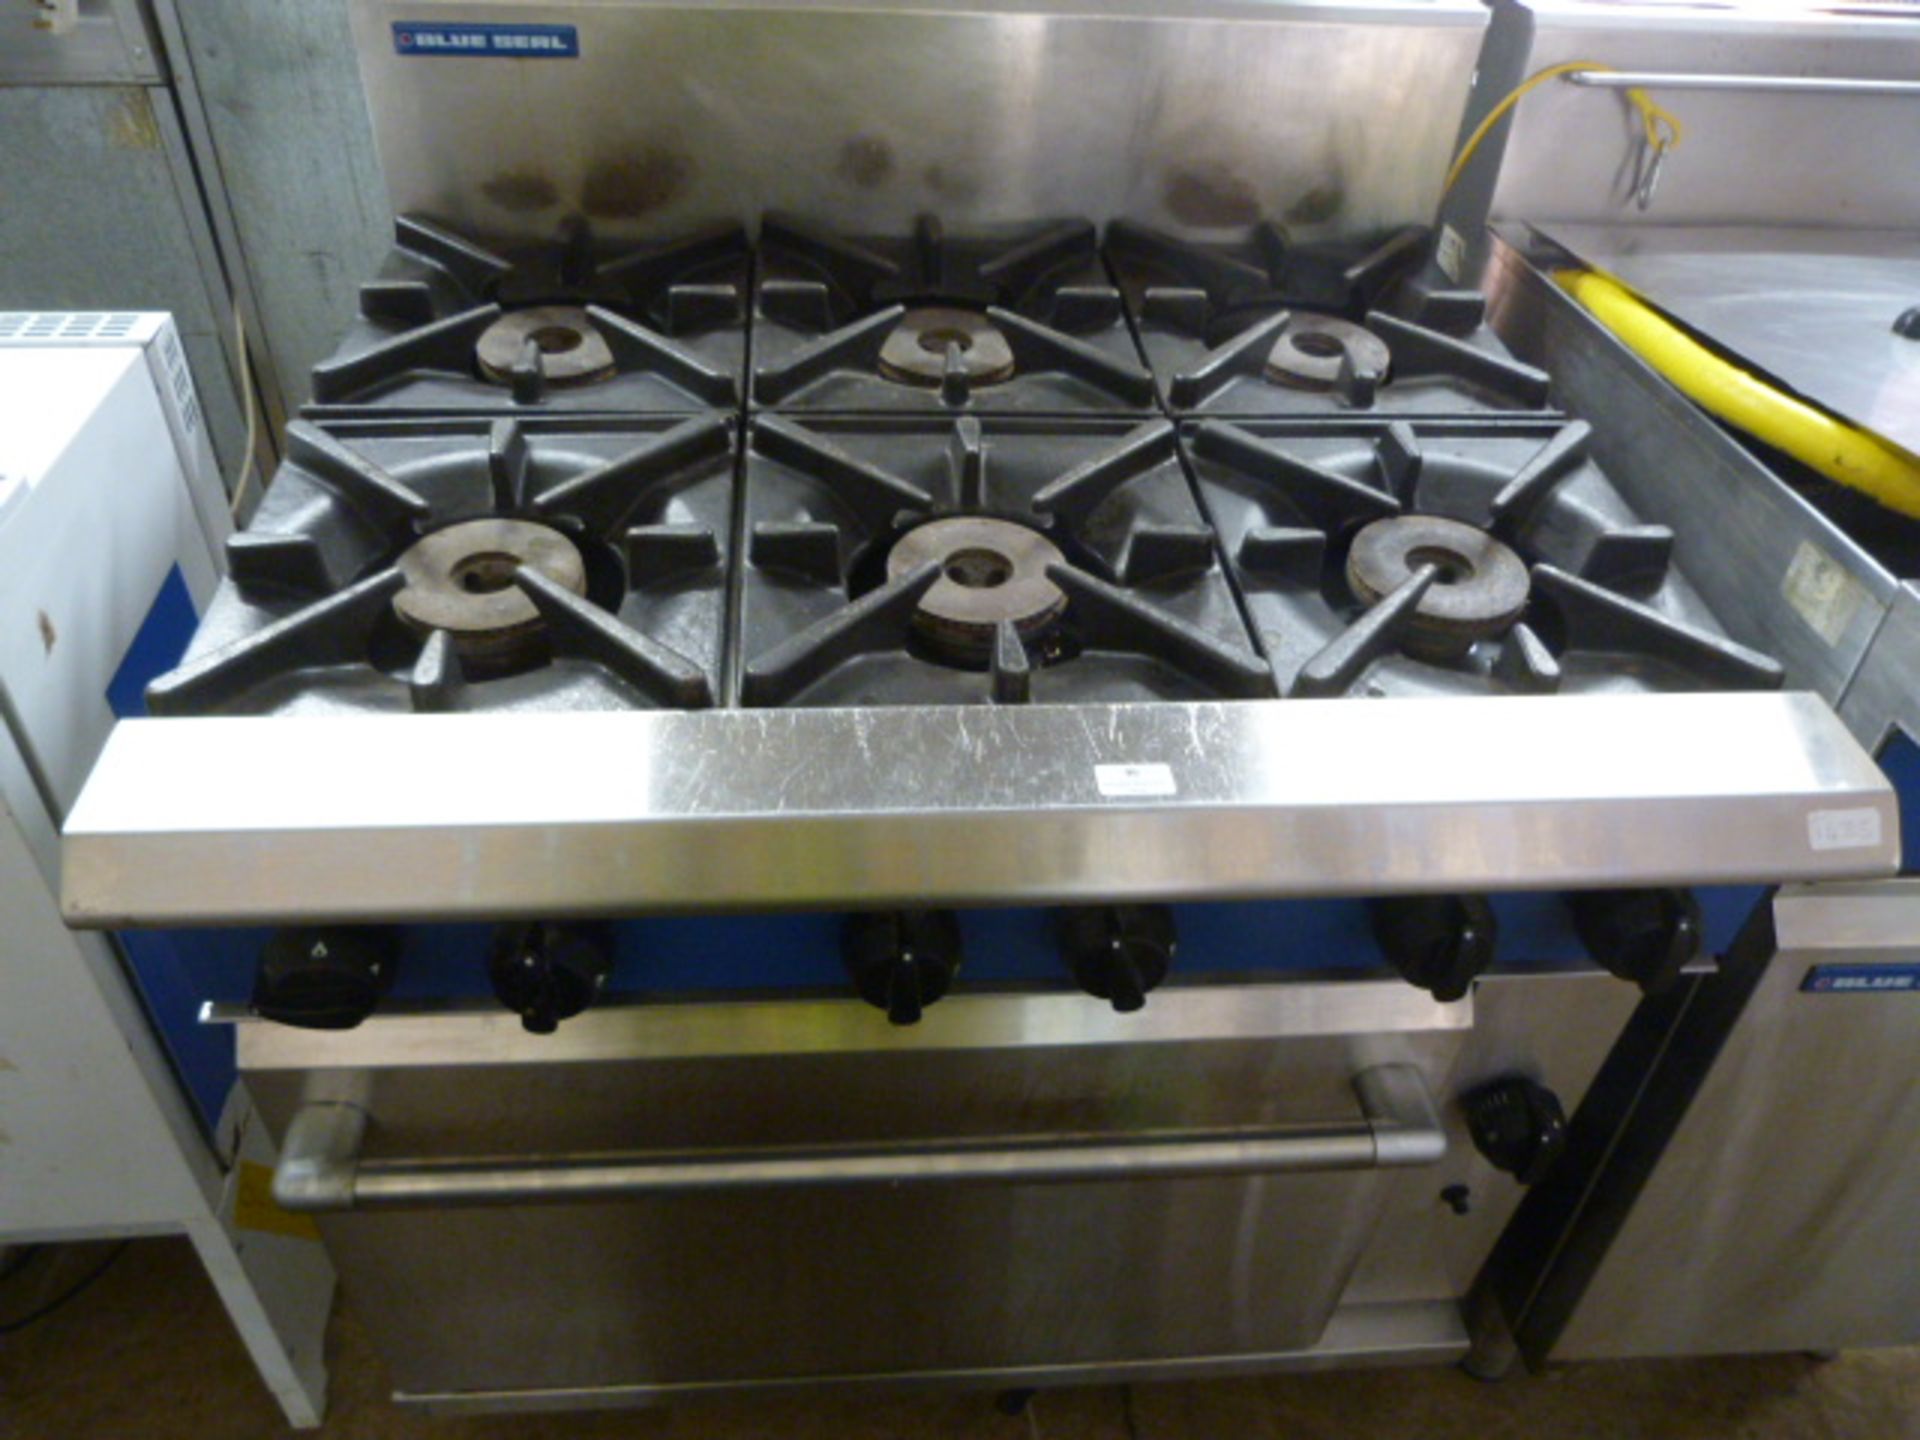 Blue Seal Rix Ring Gas Hob over Oven